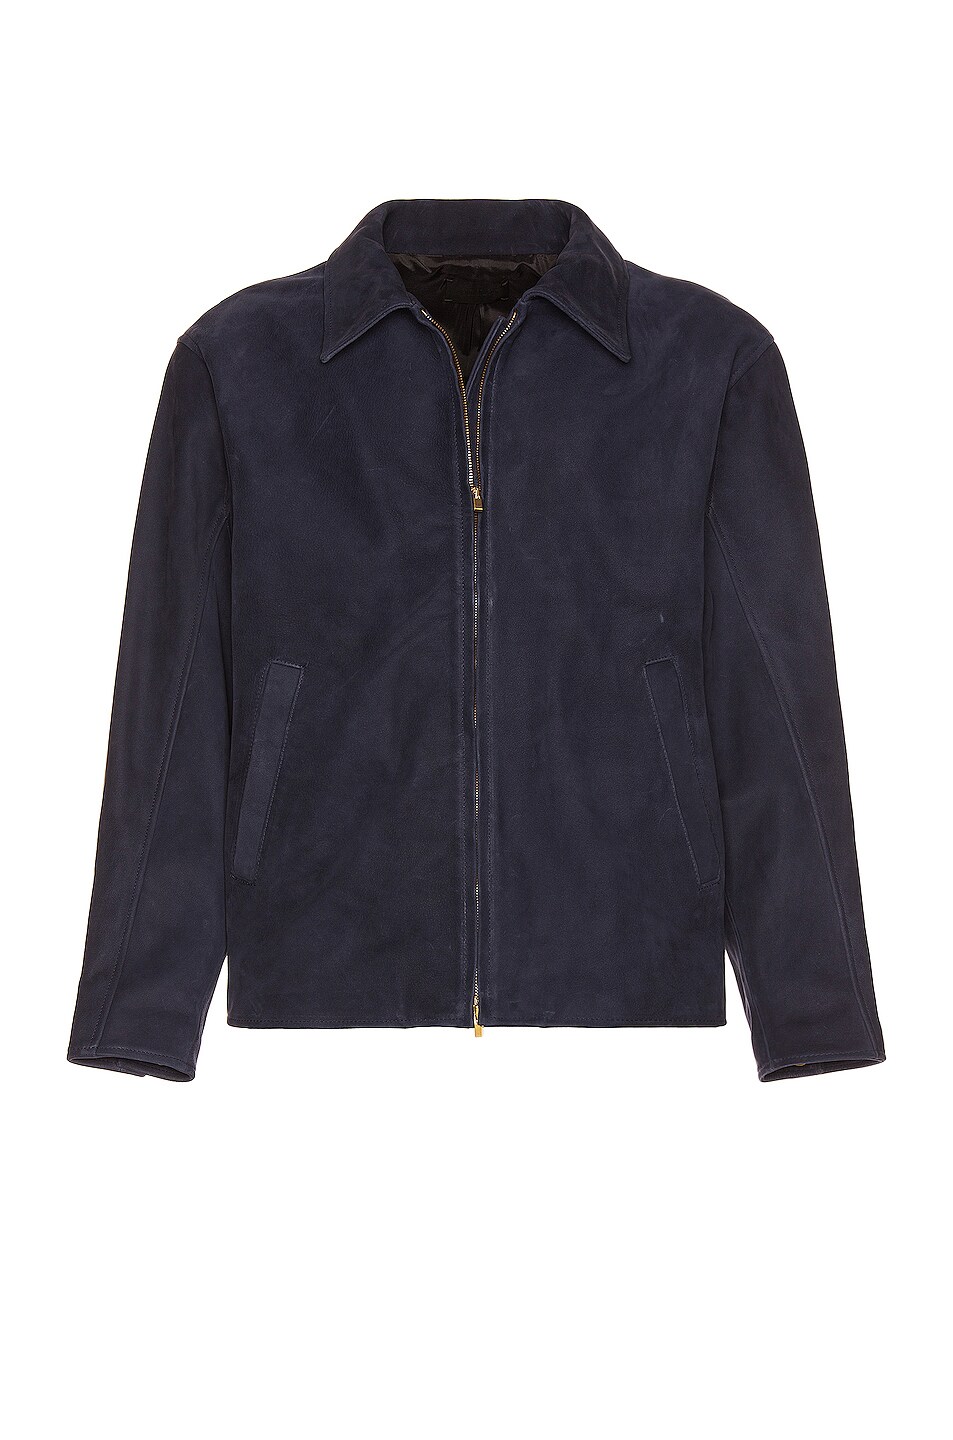 Image 1 of Fear of God Suede Jacket in Navy